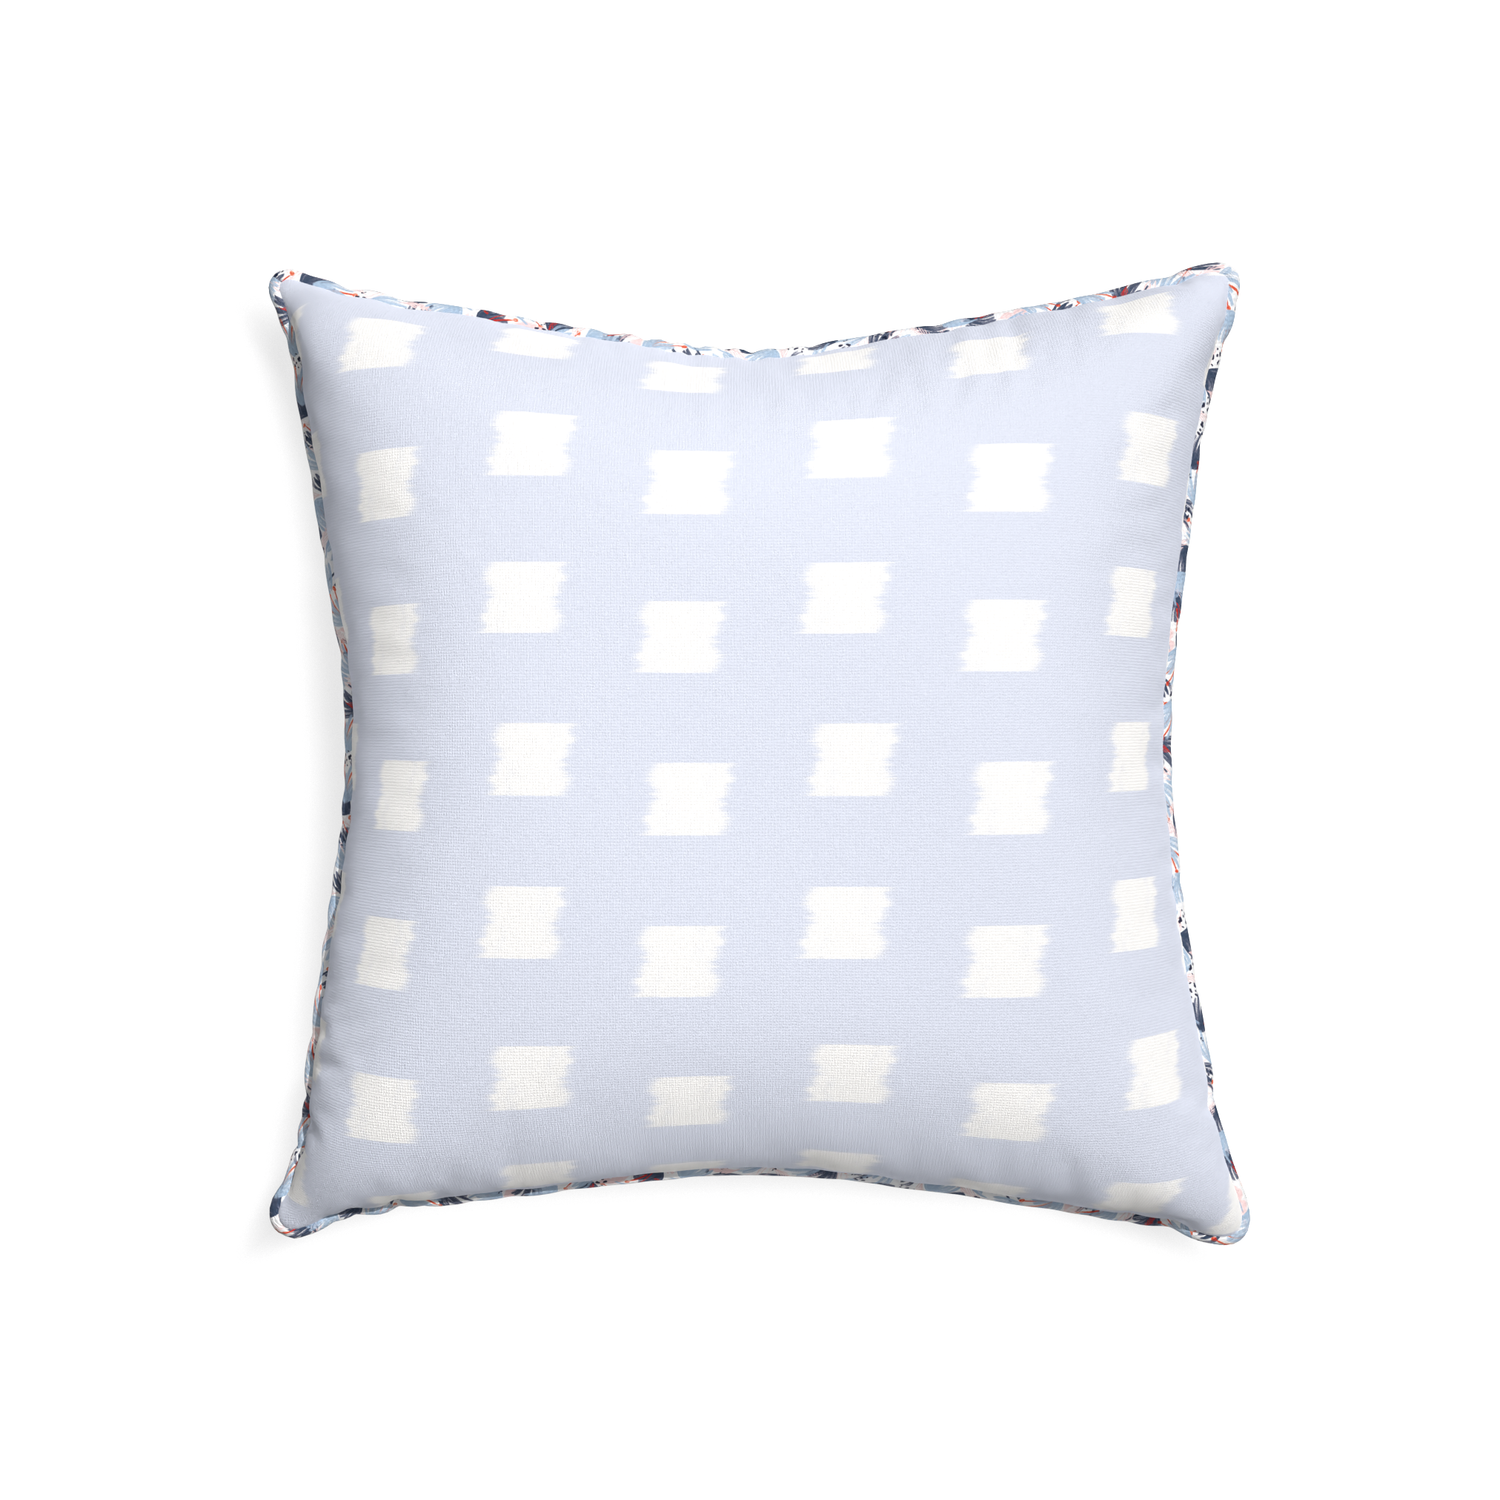 22-square denton custom sky blue patternpillow with e piping on white background